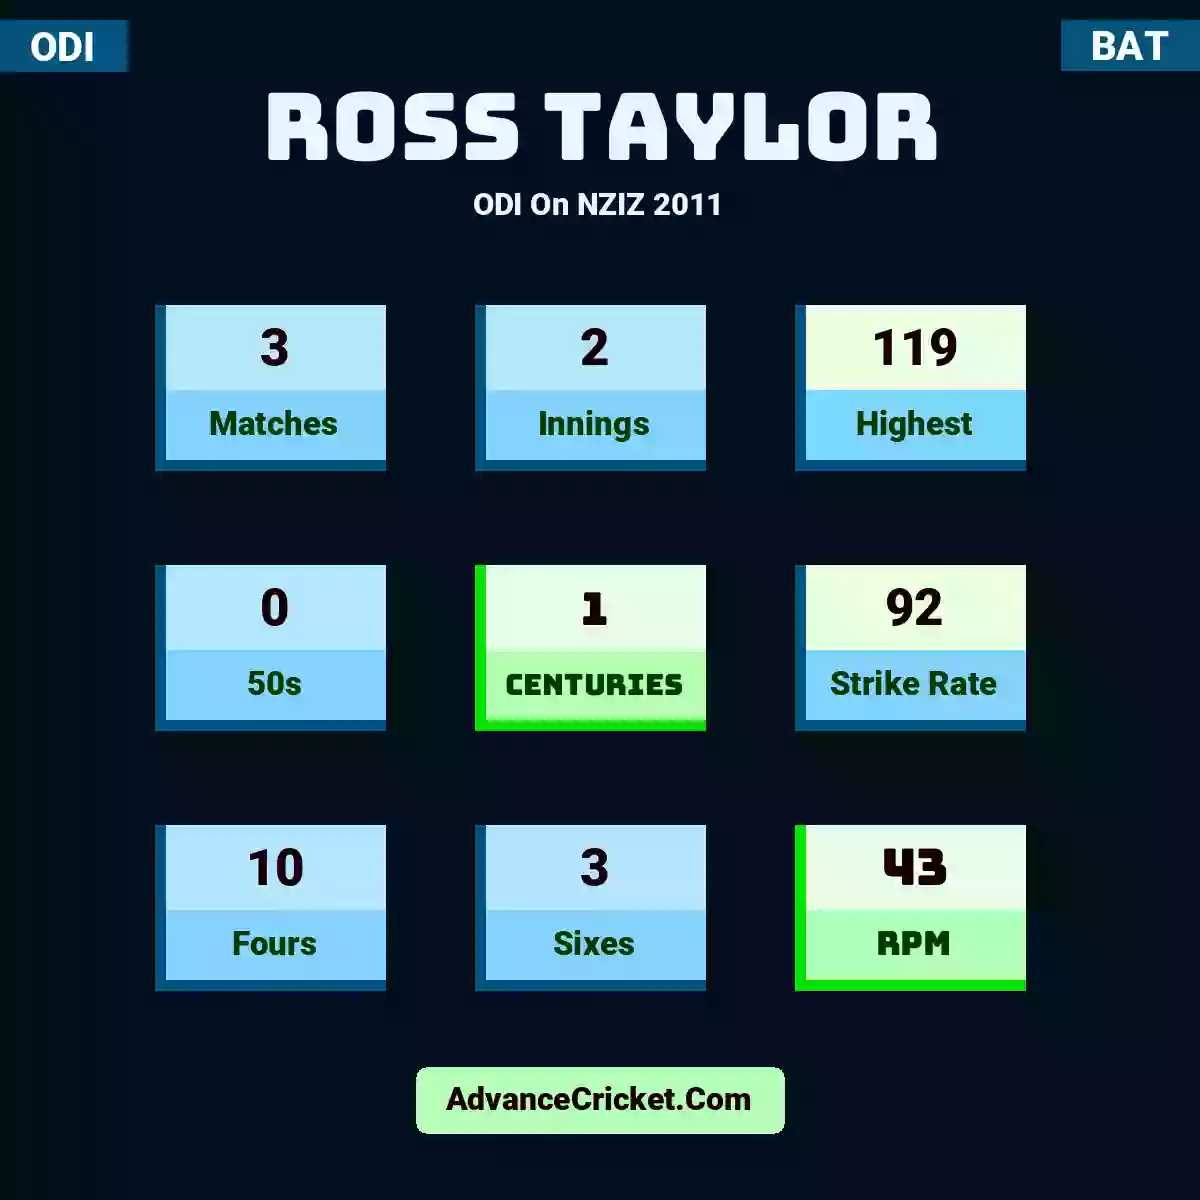 Ross Taylor ODI  On NZIZ 2011, Ross Taylor played 3 matches, scored 119 runs as highest, 0 half-centuries, and 1 centuries, with a strike rate of 92. R.Taylor hit 10 fours and 3 sixes, with an RPM of 43.